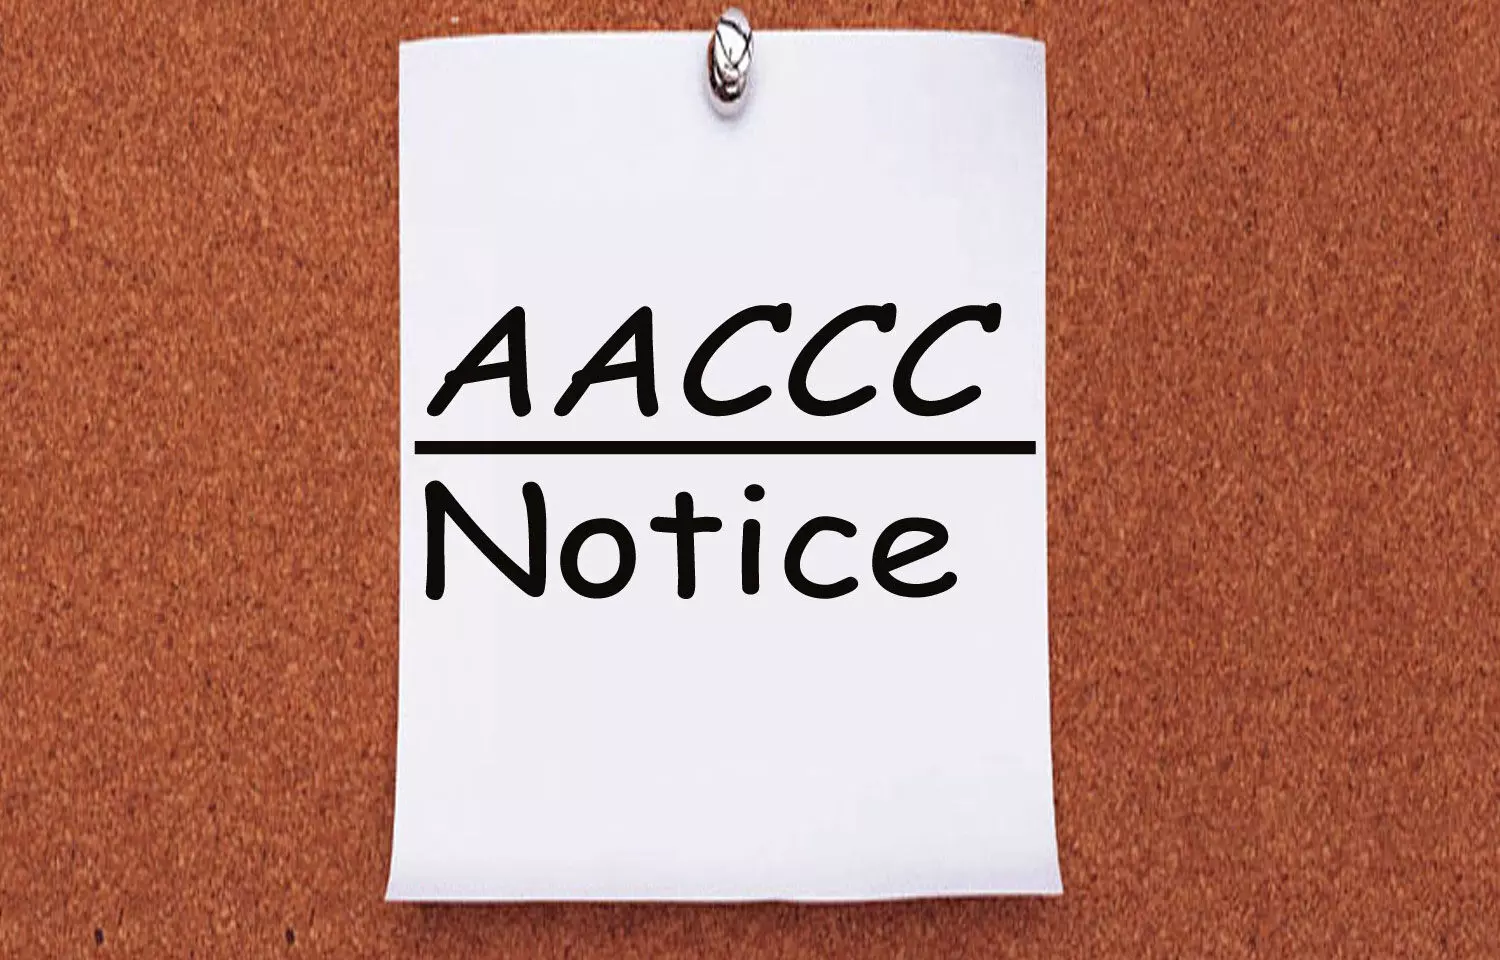 PG AYUSH Admissions 2023: AACCC releases counselling schedule, complete details here